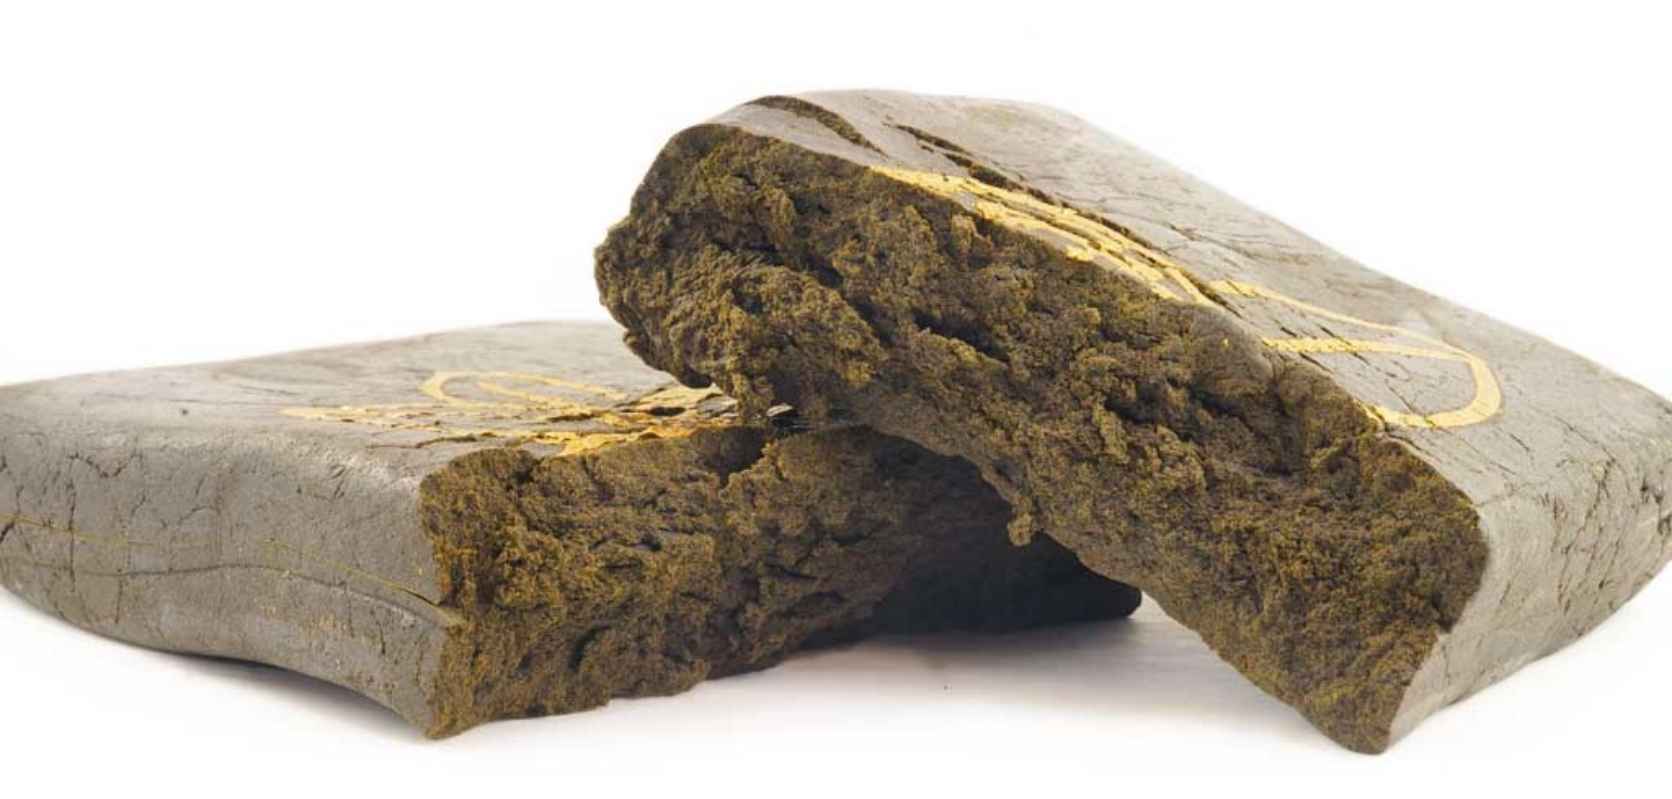 If you are into fruity delicacies, the Blueberry Hashish is perfect for you.